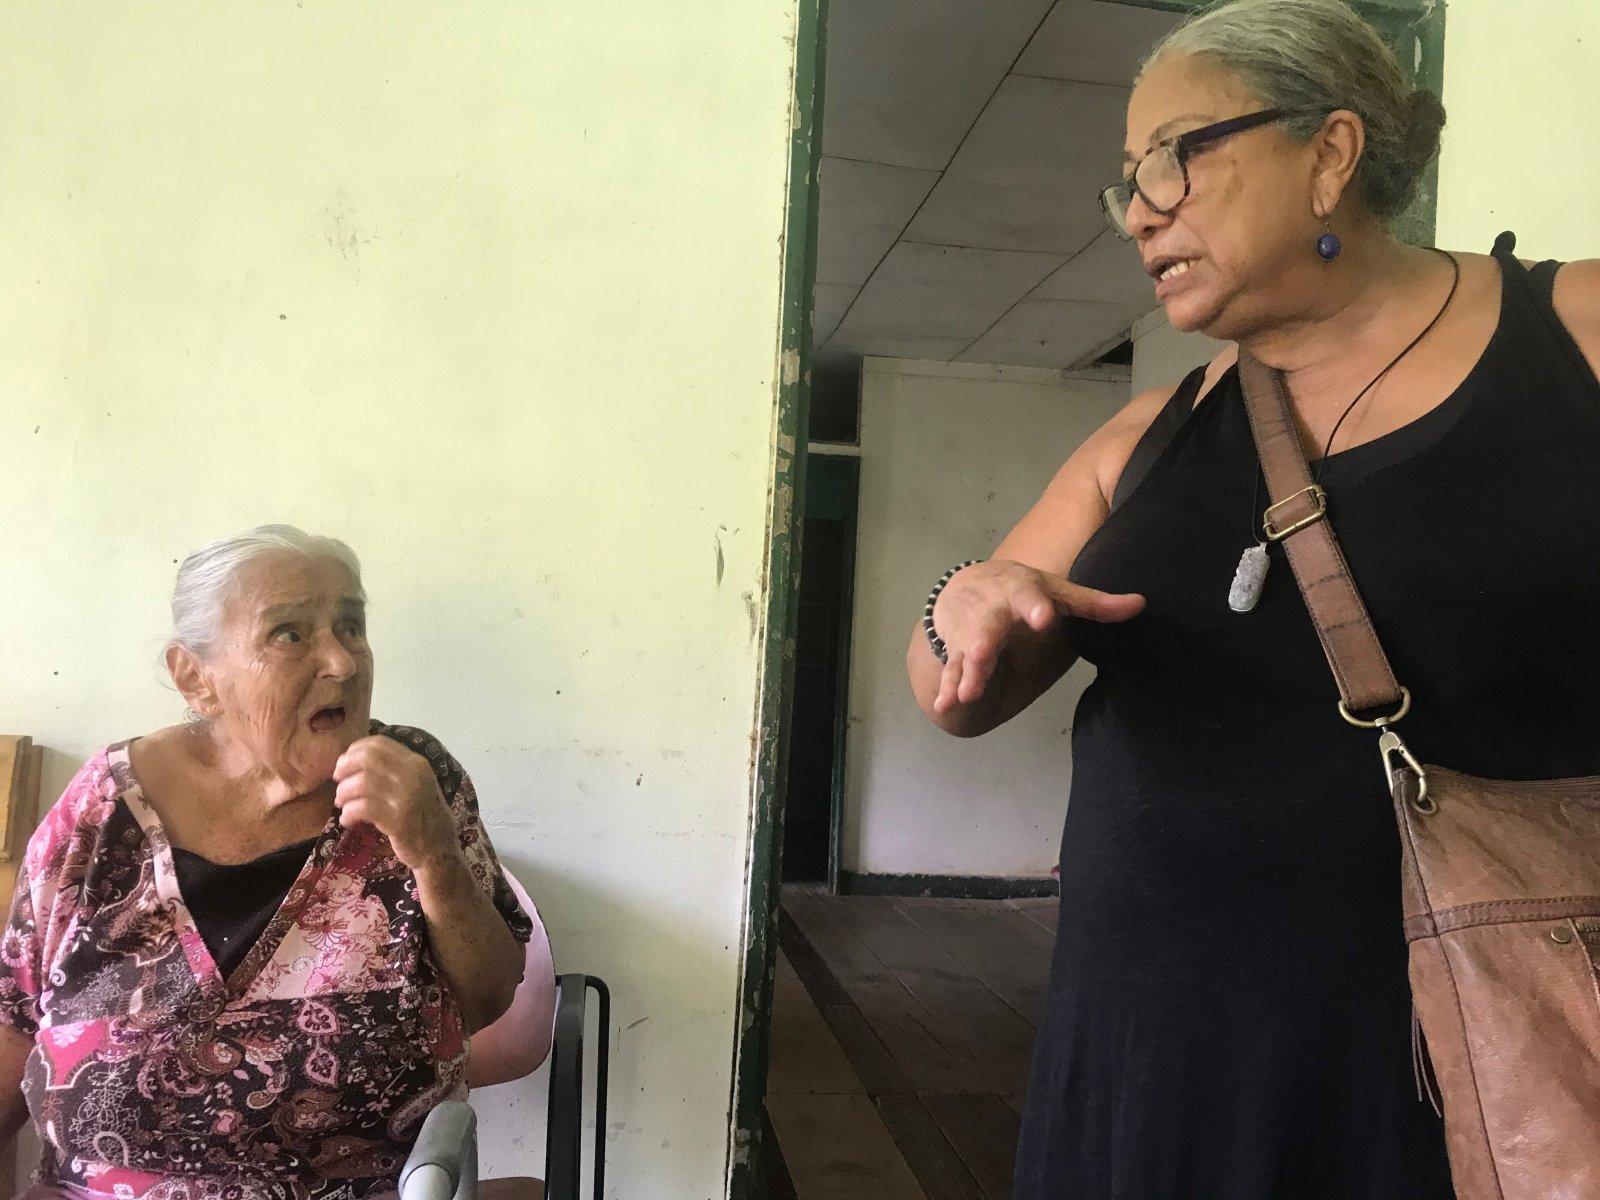 Irma raised six kids making tamales and now that all of there children lost their jobs in tourism, she is making tamales with them as a survival strategy after receiving the support of the Mano Vuelta "sistering".